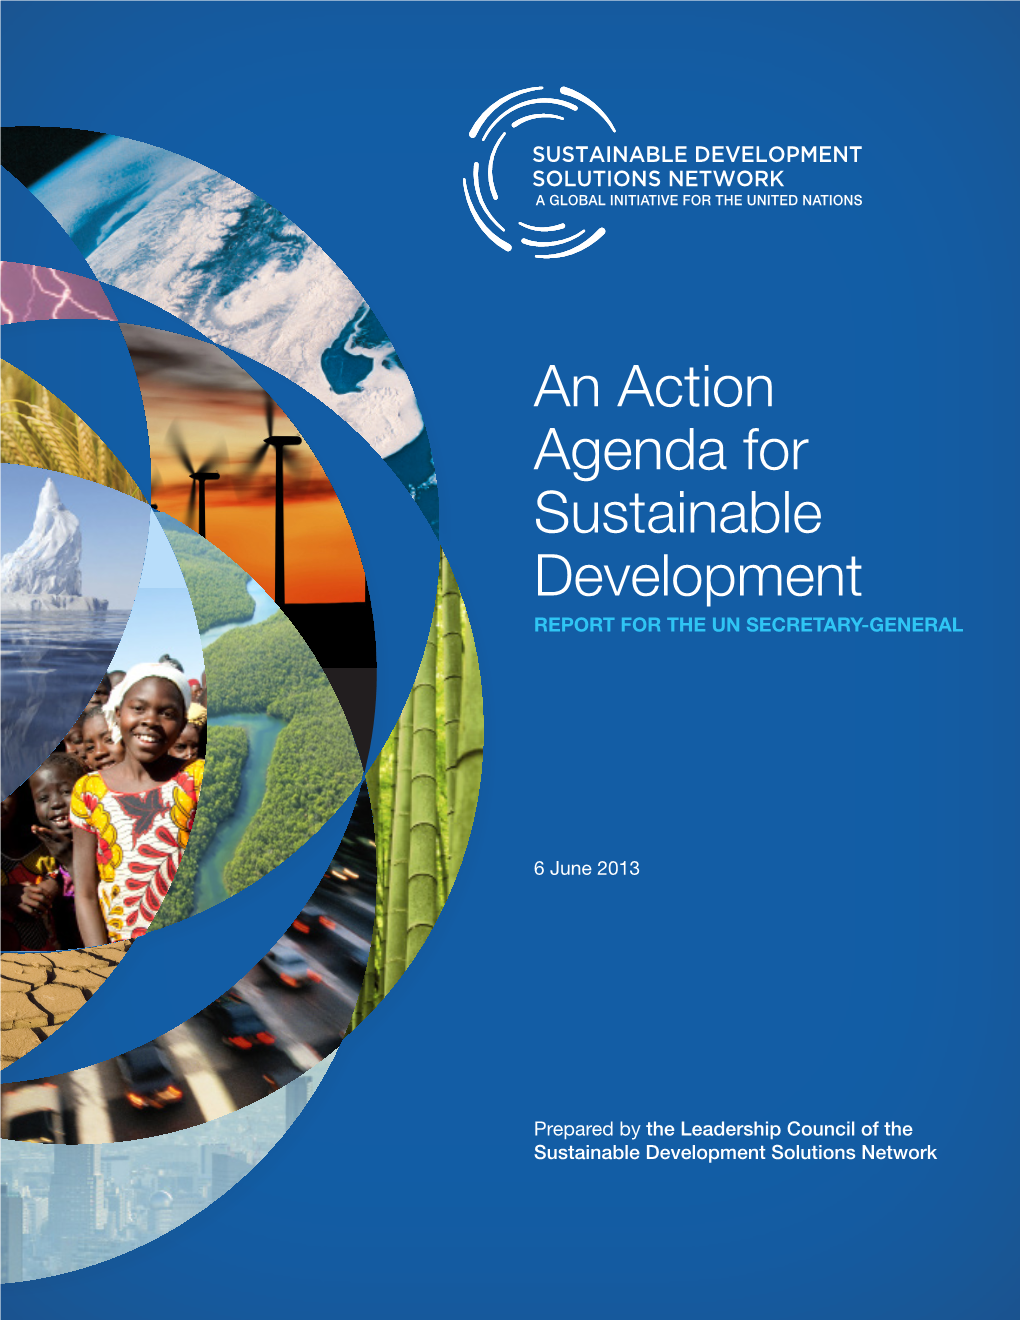 An Action Agenda for Sustainable Development REPORT for the UN SECRETARY-GENERAL